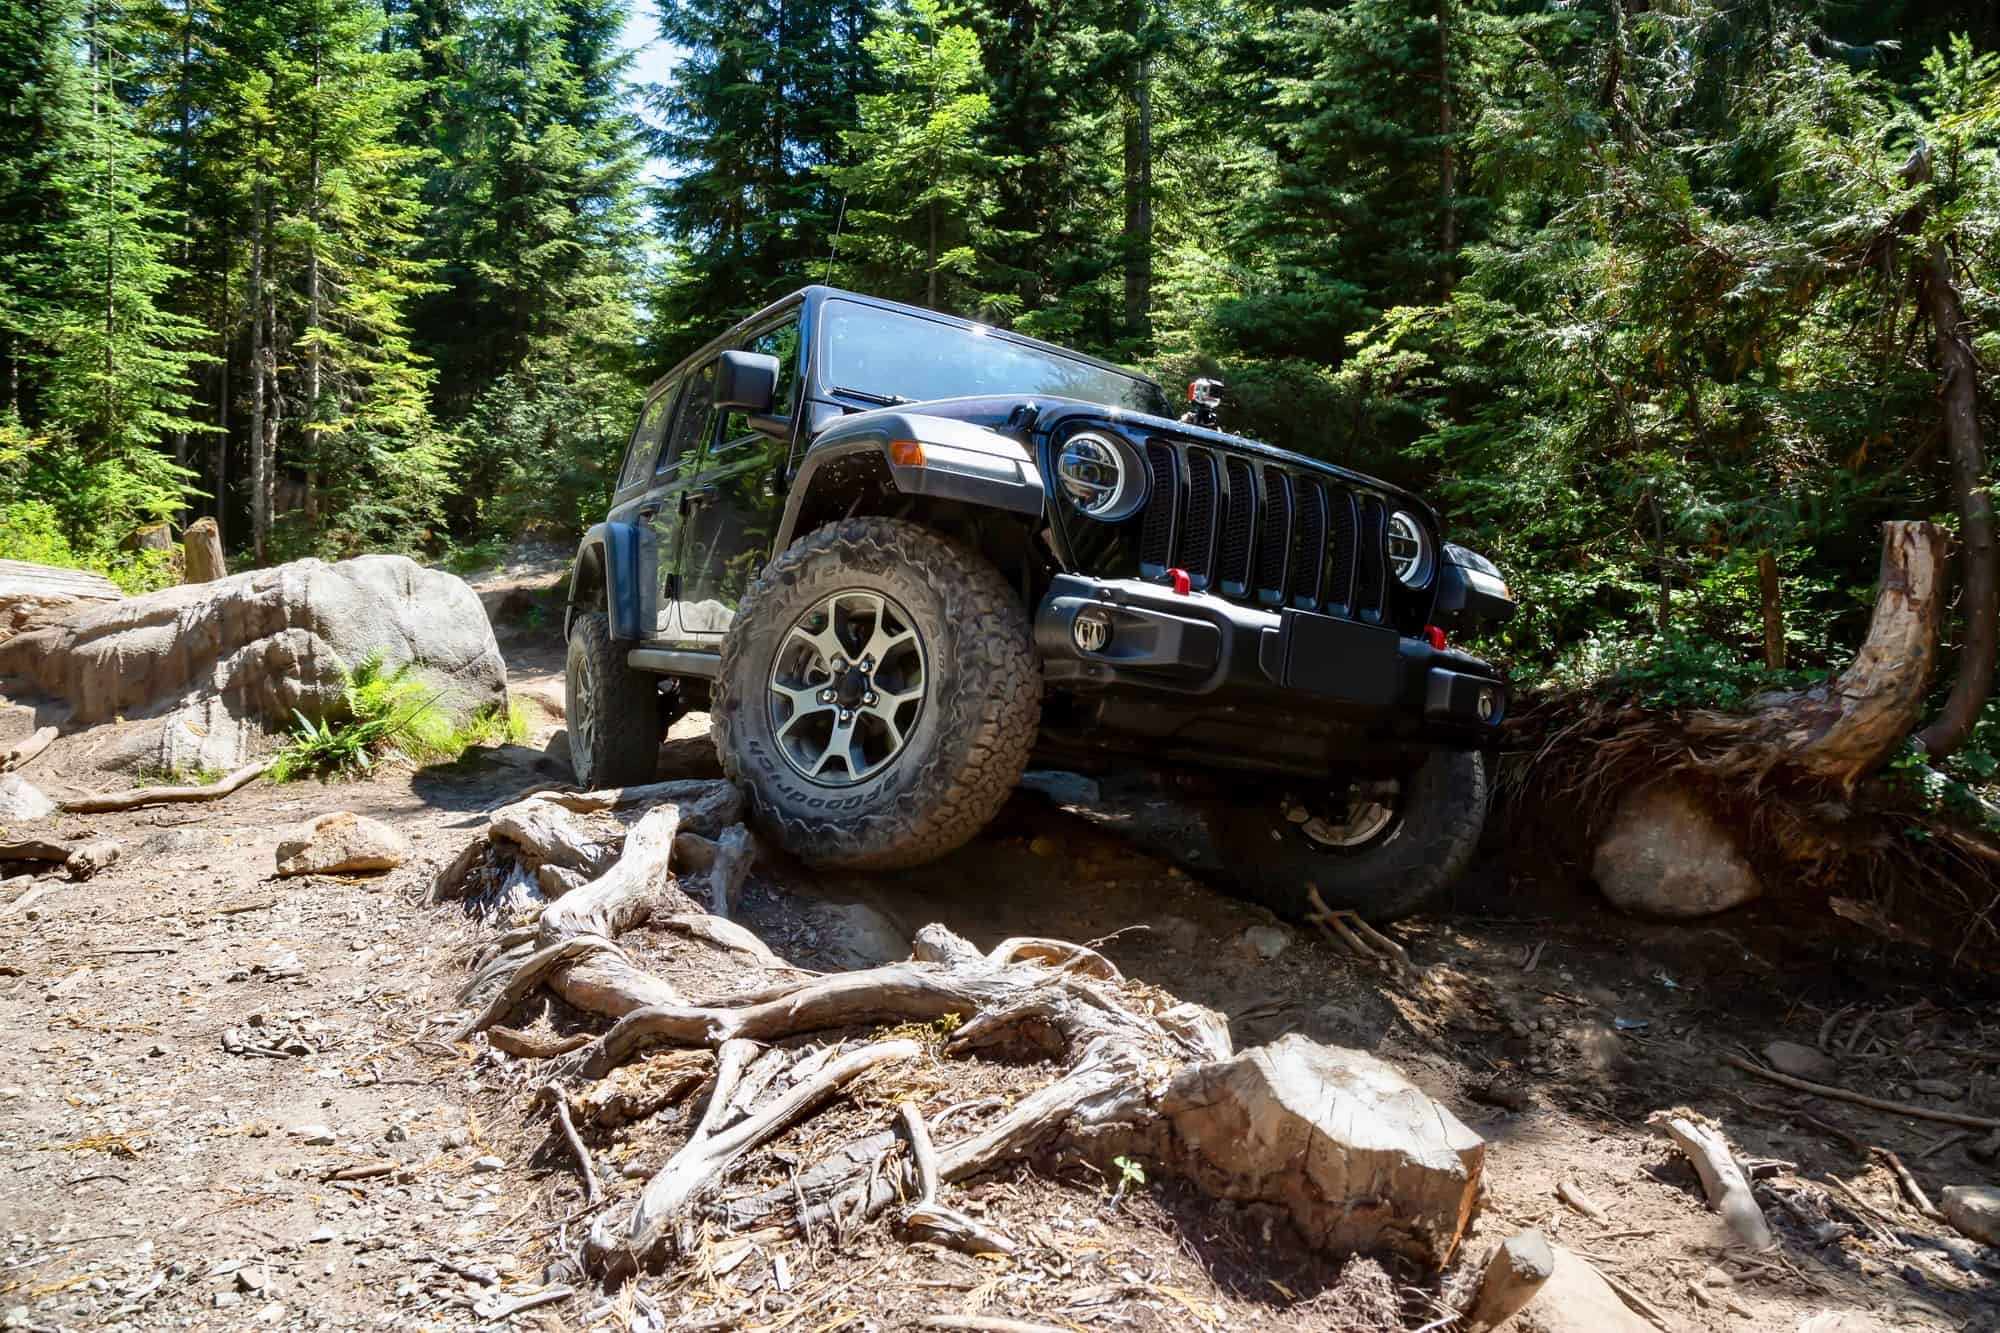 So you want to tackle the daunting drive of the Rubicon Trail